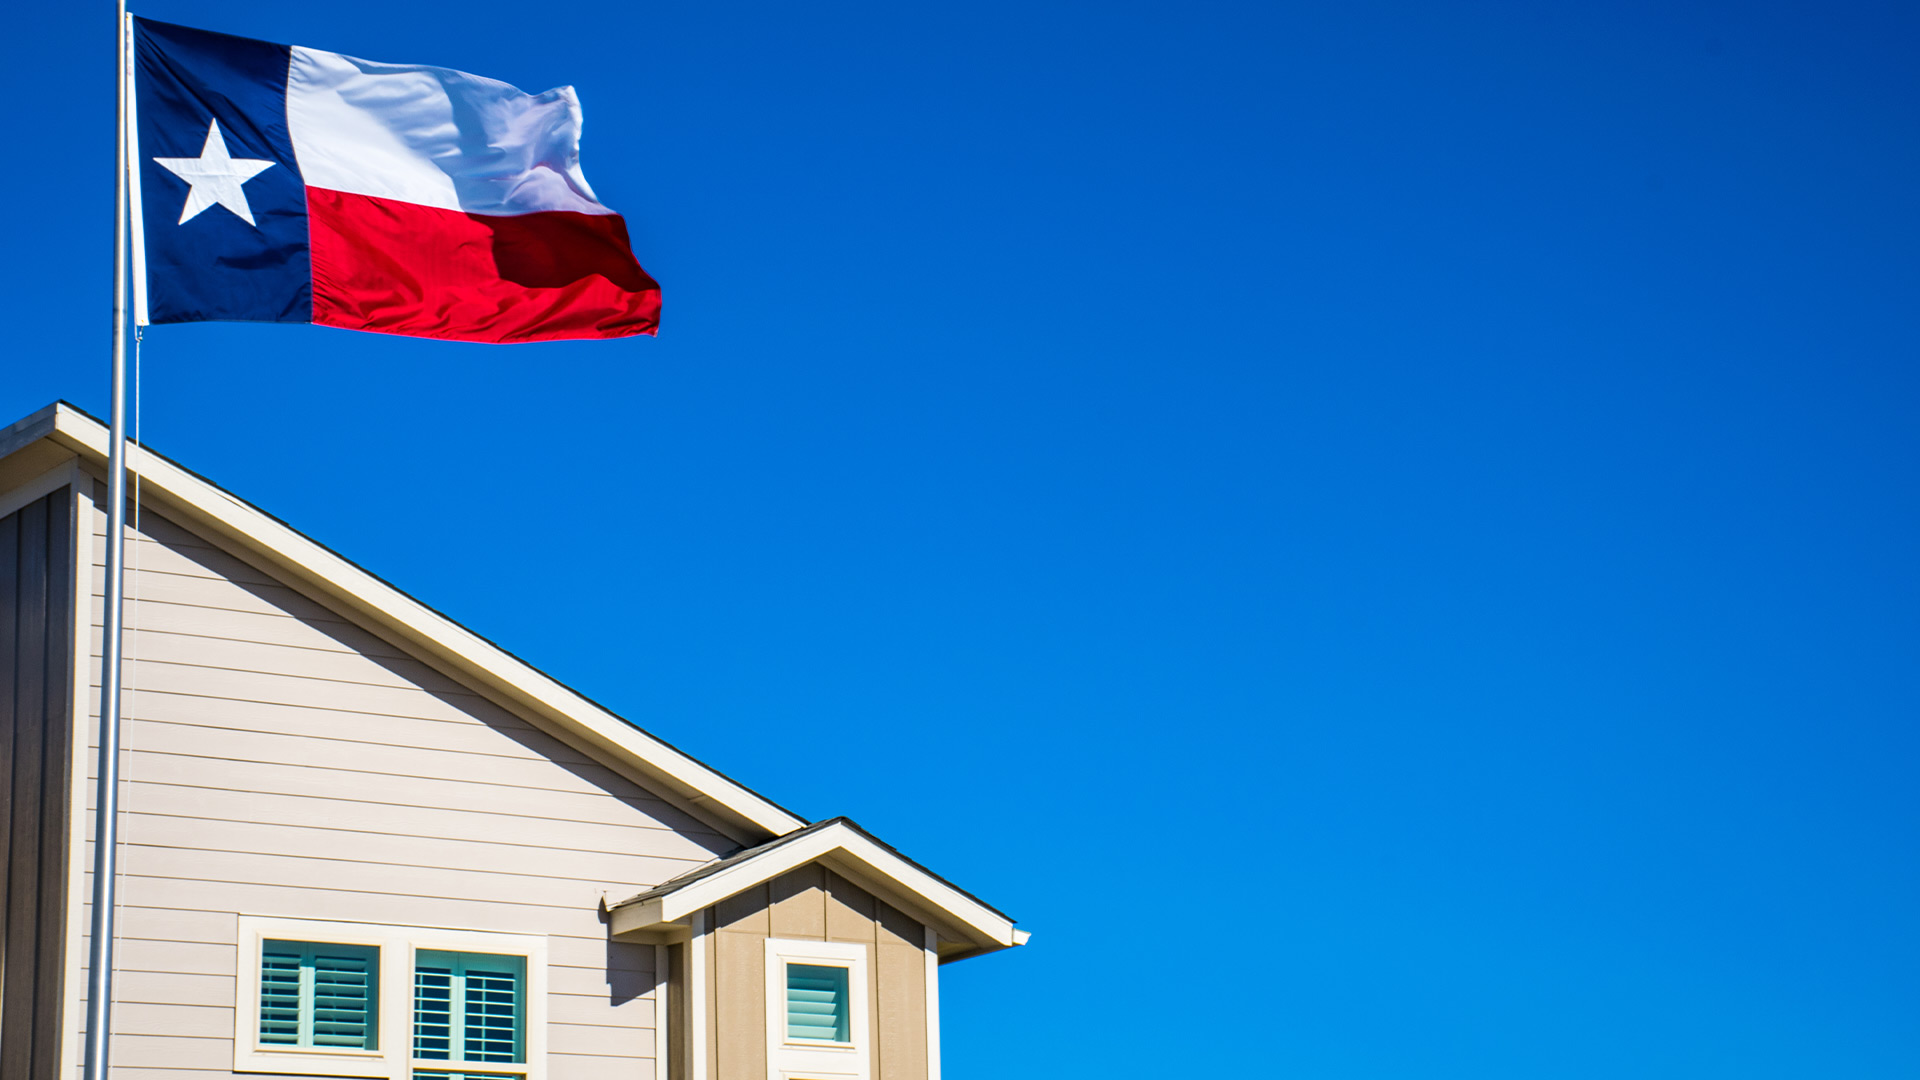 Texas Cash-Out Refinance Guide | 2022 Rules and Requirements